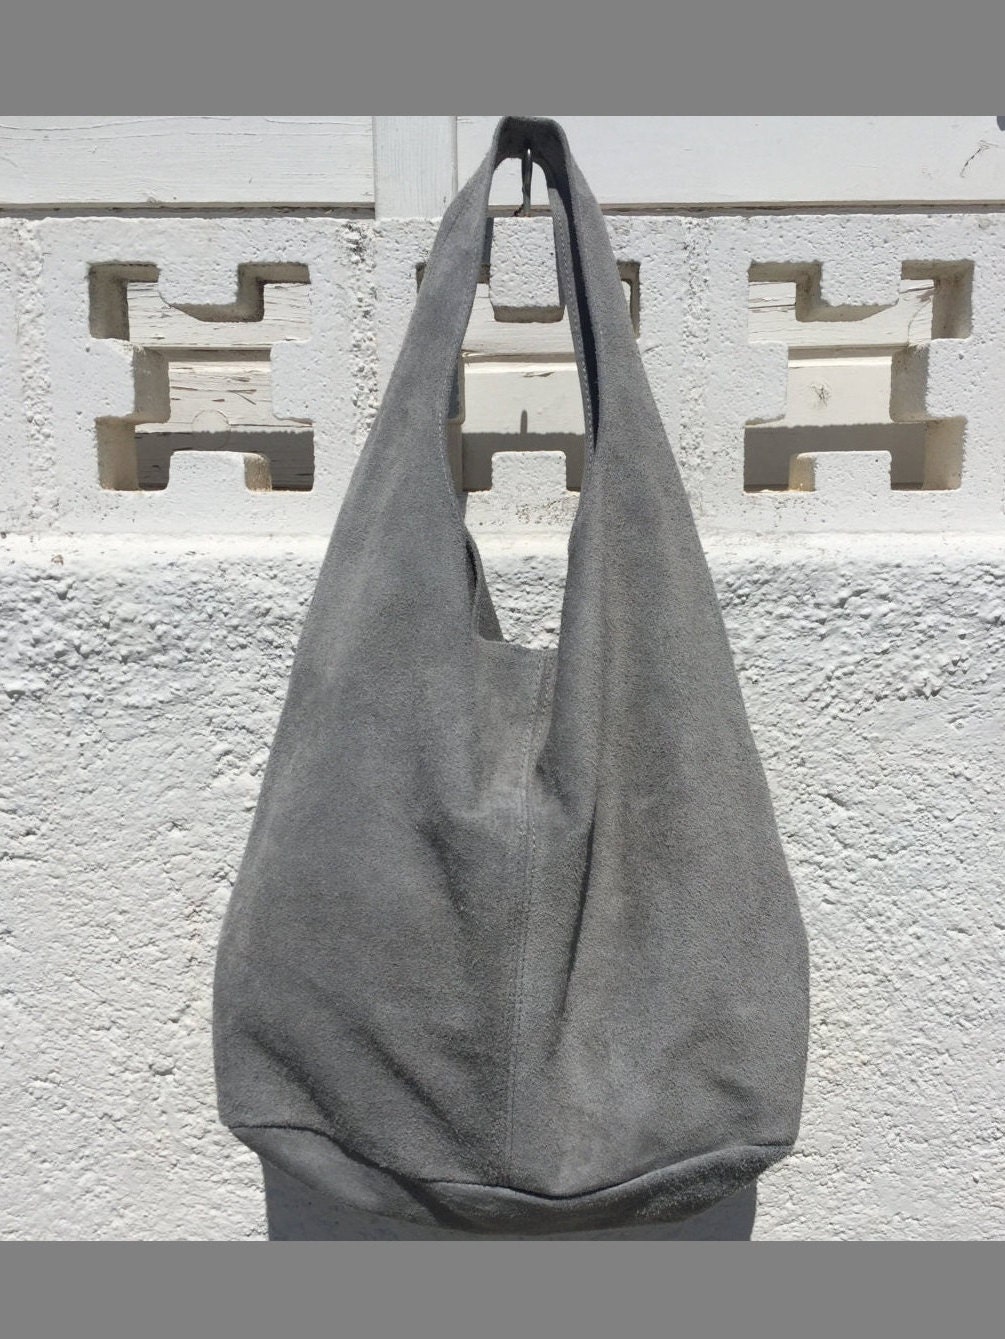 Slouch bag.Large TOTE leather bag in GRAY. Soft natural suede | Etsy